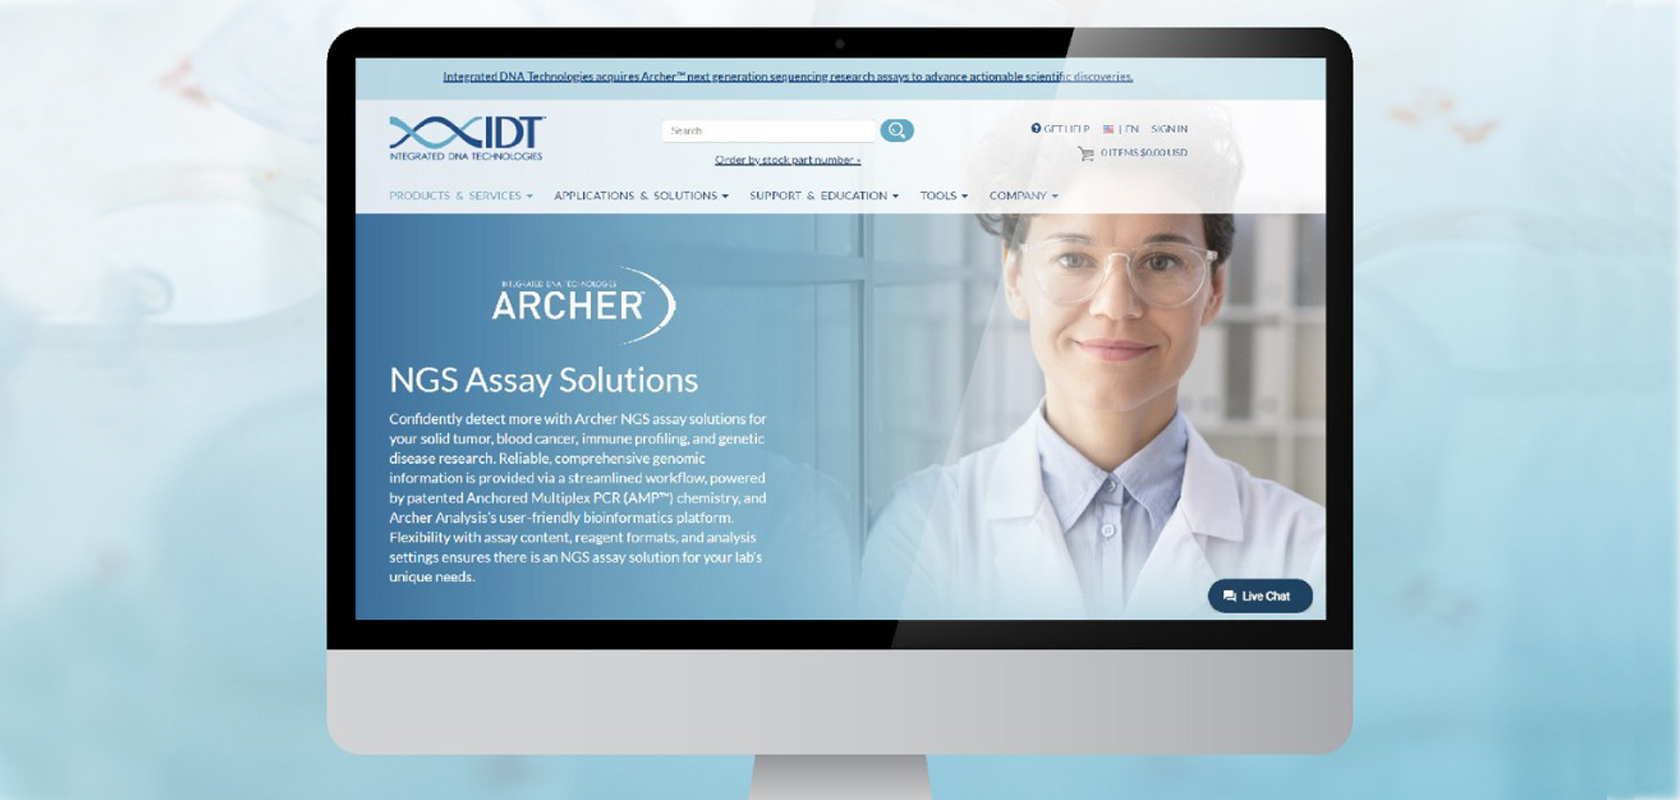 Find Archer assays now on IDT's website! See up-to-date product information